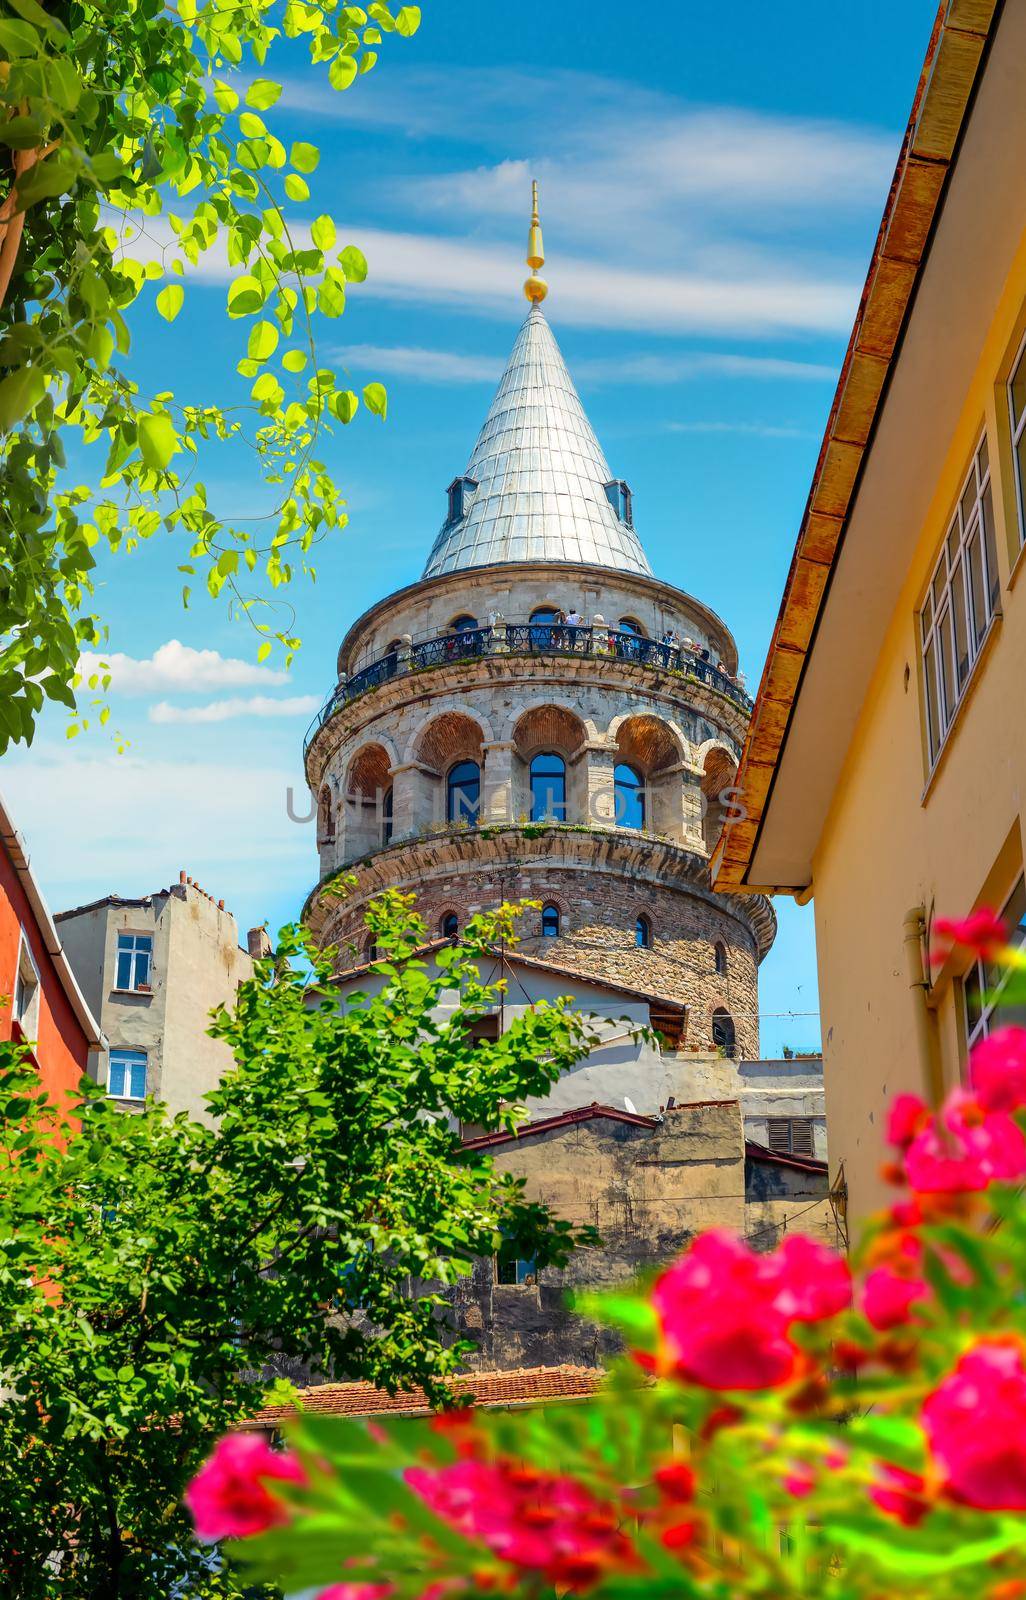 Galata Tower near the house by Givaga